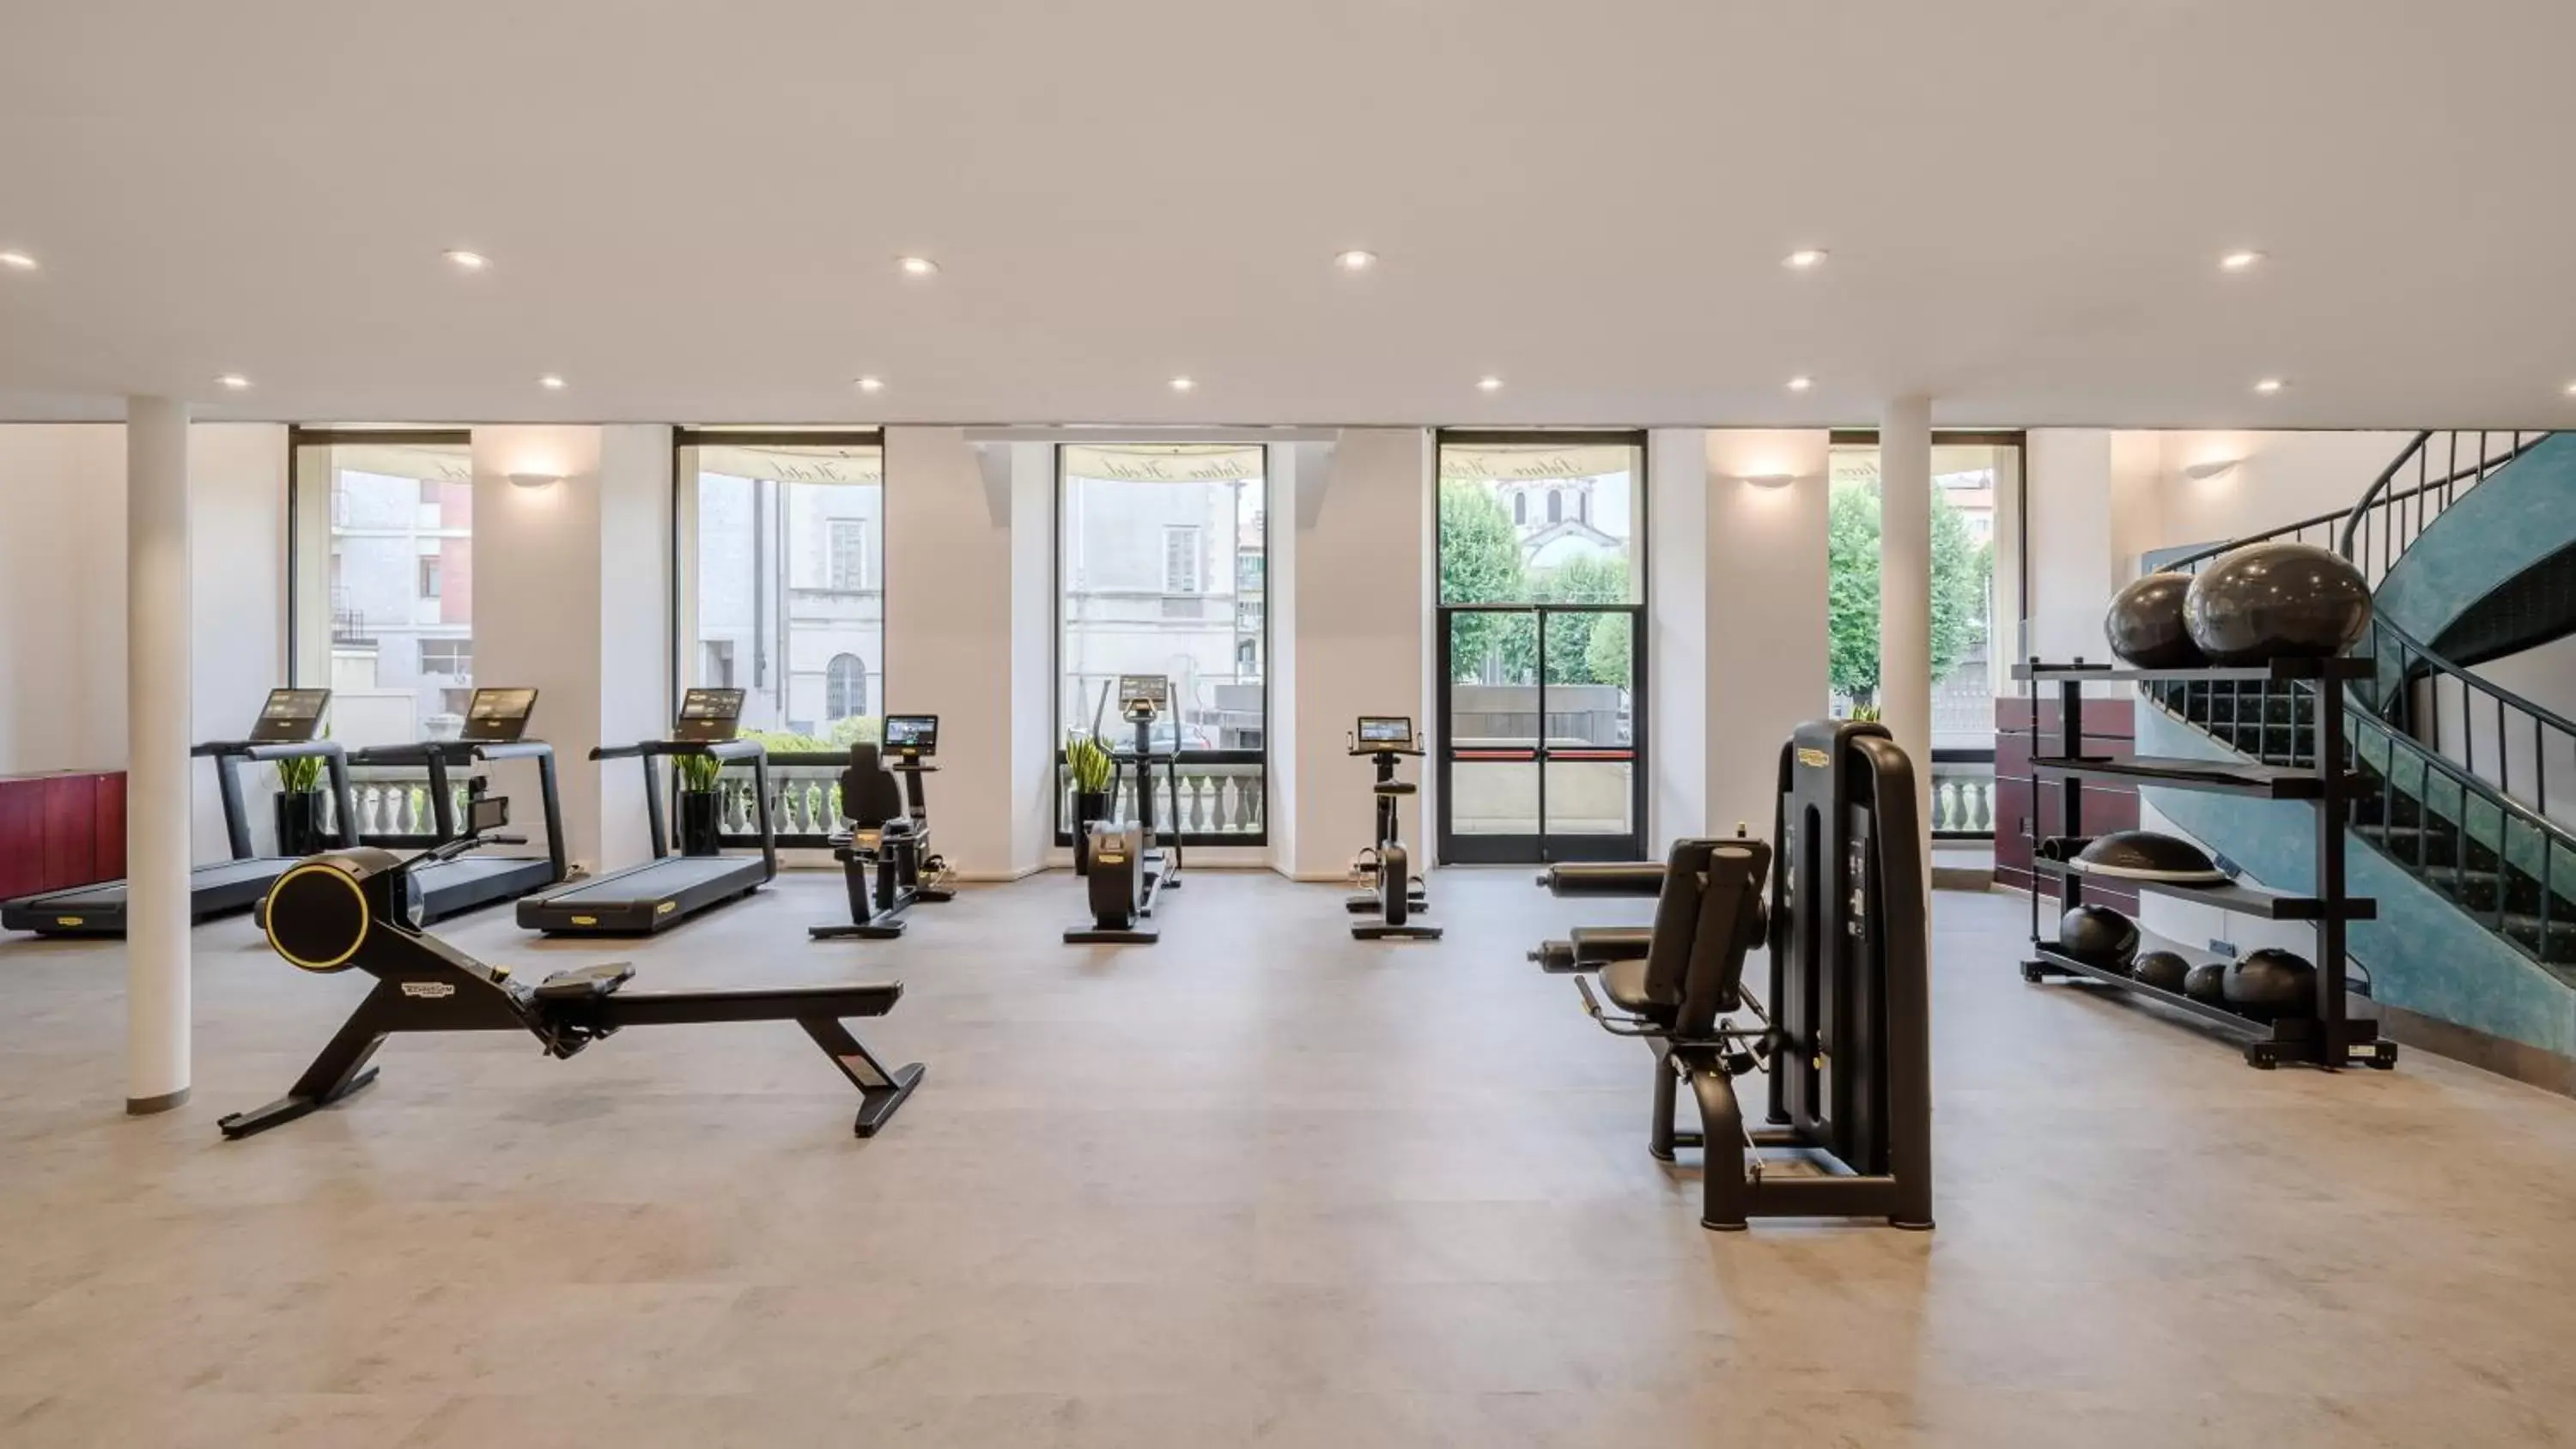 Fitness centre/facilities, Fitness Center/Facilities in Palace Hotel Lake Como